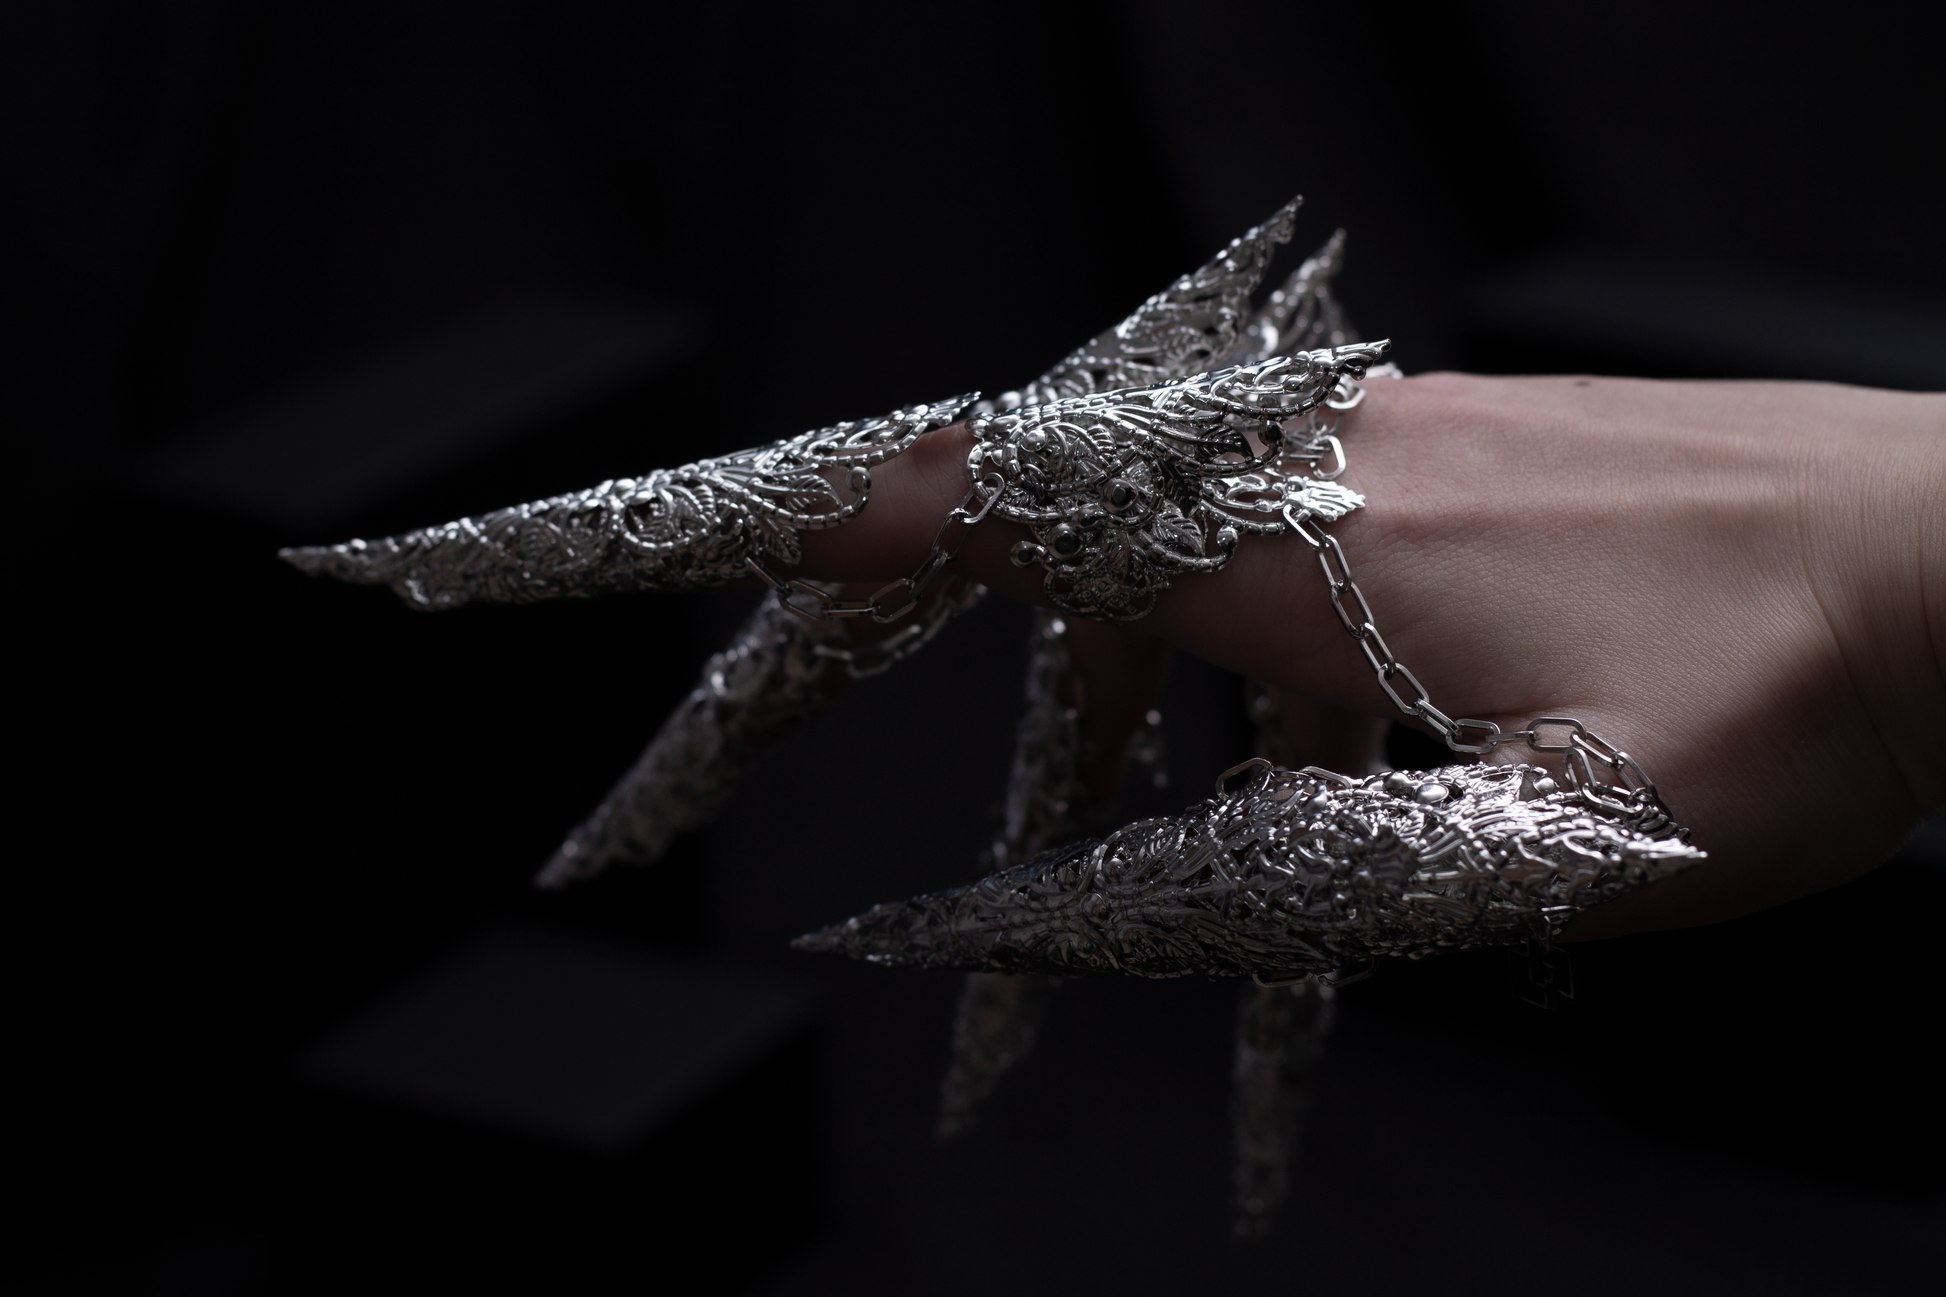 A hand is transformed into a fantastical vision with Myril Jewels' full dragon-like claw rings set, a bold example of neo-gothic artistry. This eye-catching design is a blend of Halloween elegance and avant-garde fashion, ideal for the gothic enthusiast looking to make a statement at any event